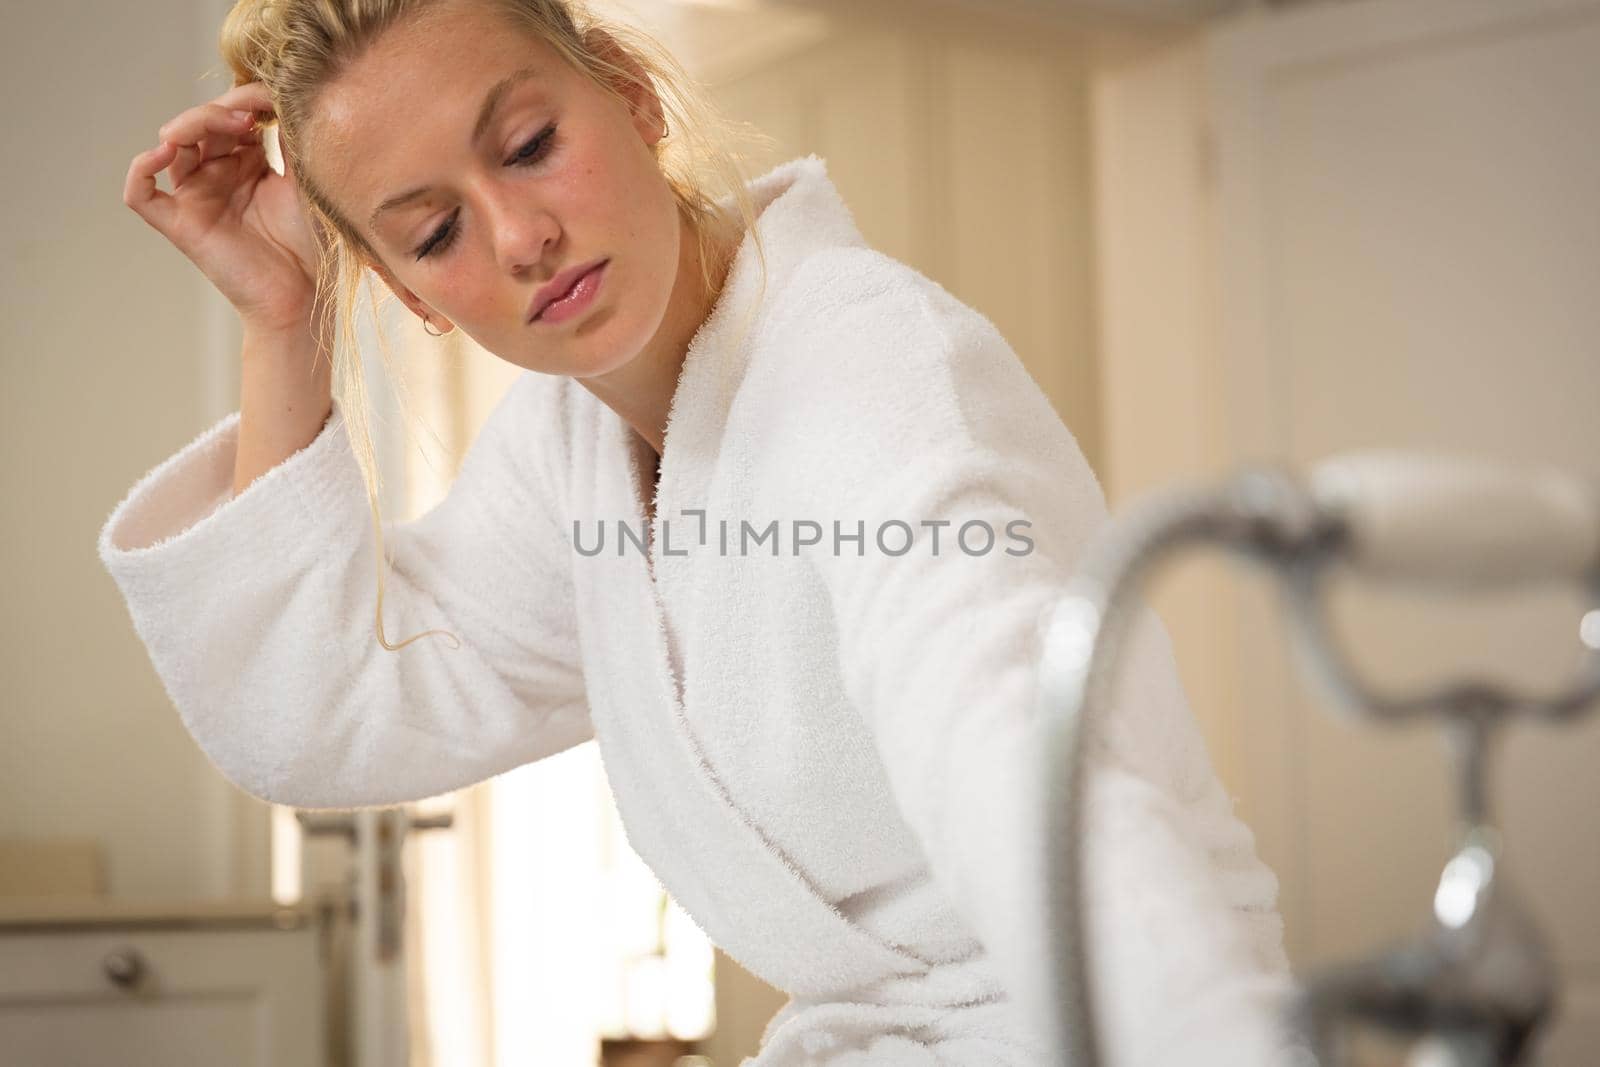 Caucasian woman in bathroom wearing bathrobe, running a bath. health, beauty and wellbeing, spending quality time at home.